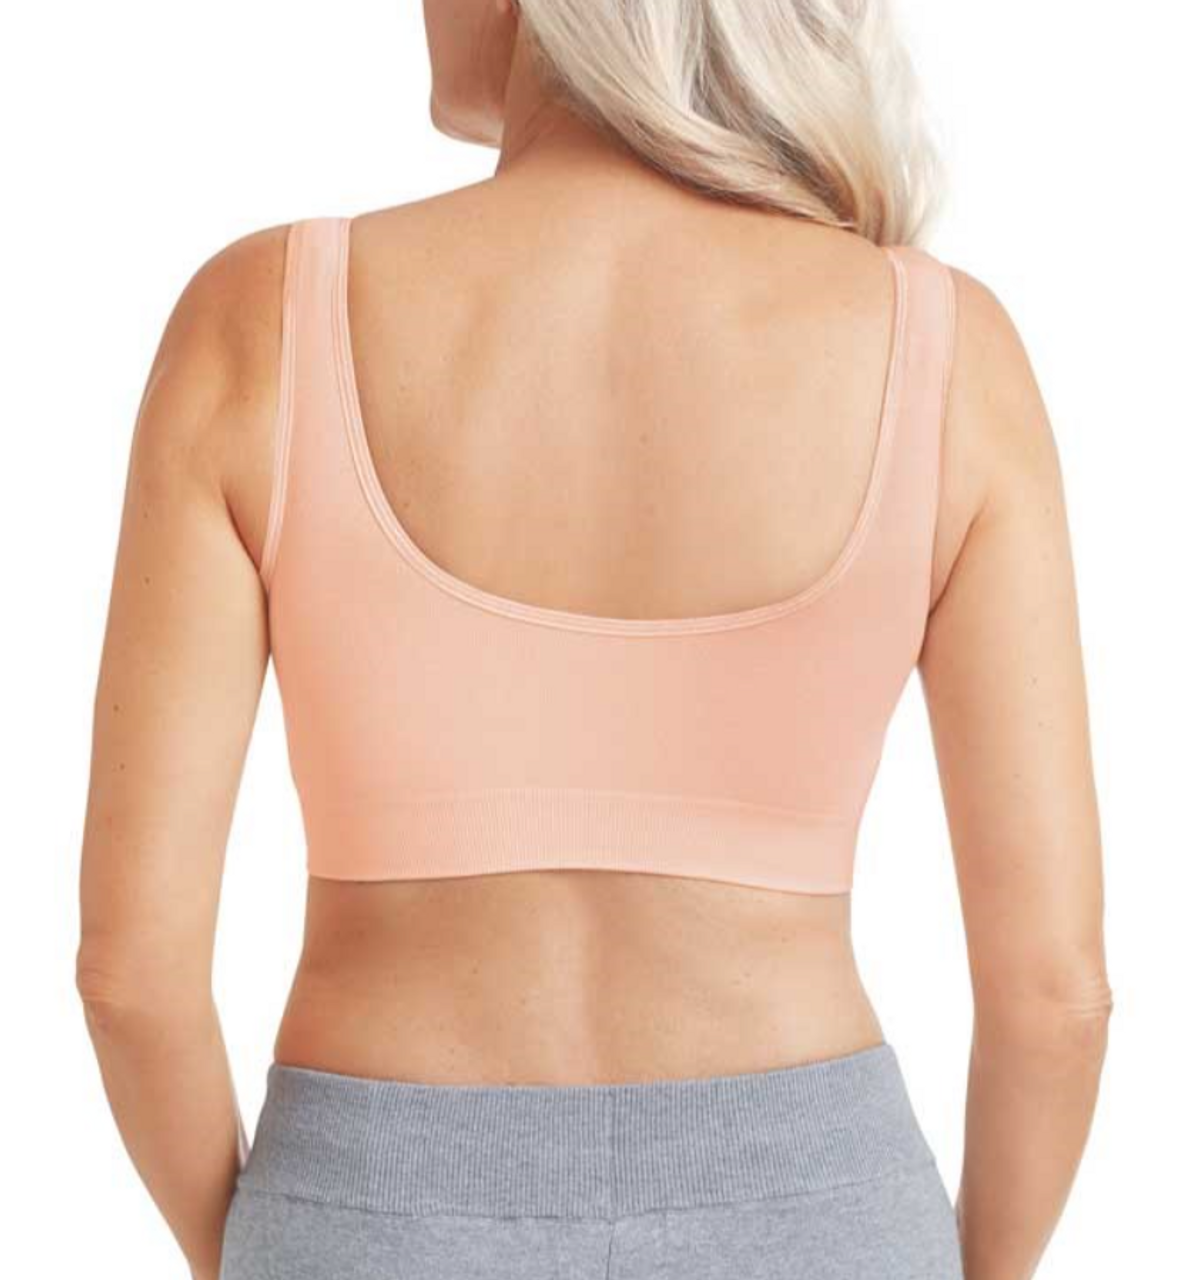 Now Post-Op Support Bras Are (Finally) Available On The Highstreet -  HerFamily